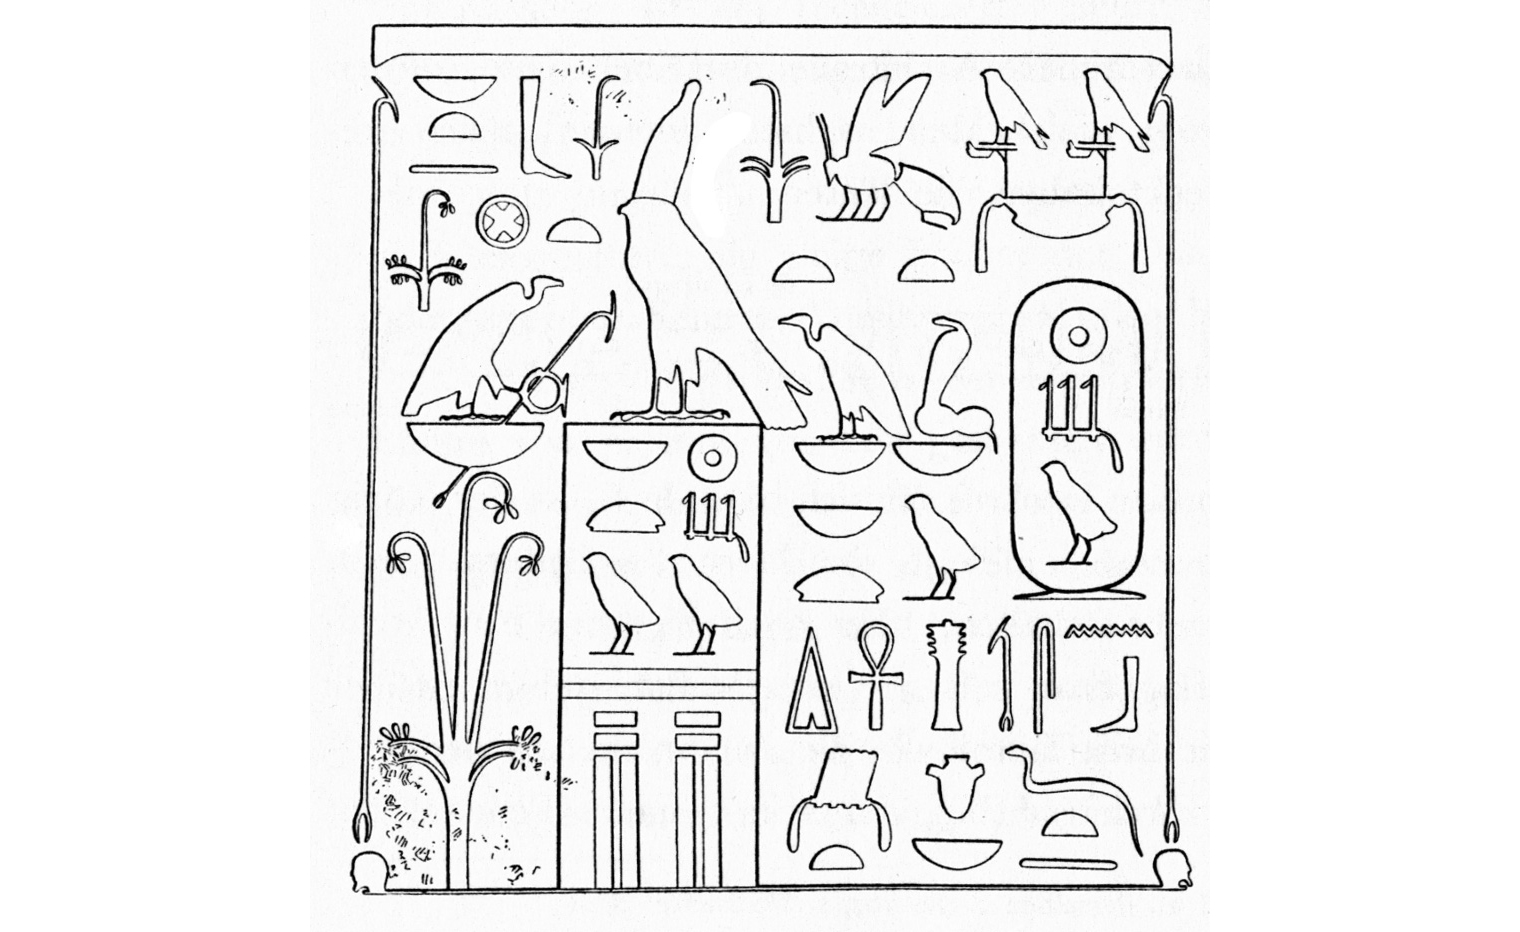 Line drawing of a hieroglyphic inscription.